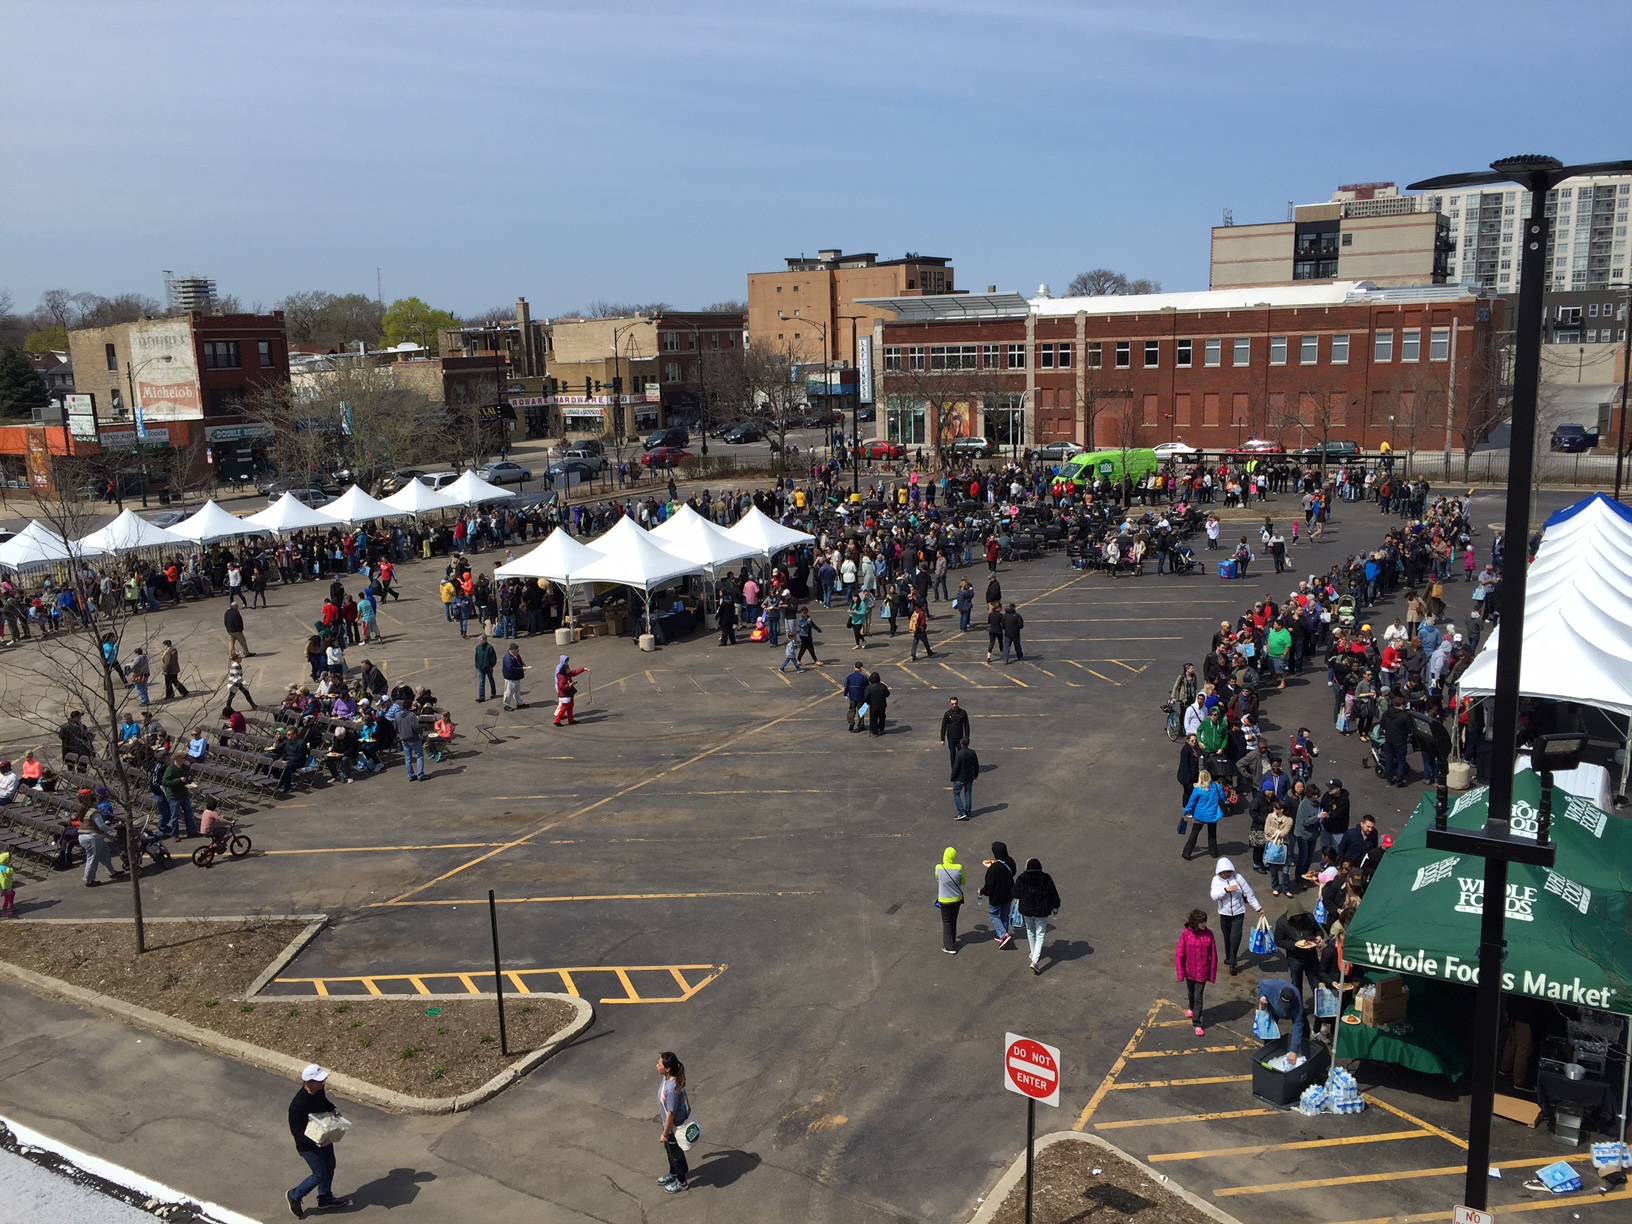 Whole Foods Market East Lansing to celebrate Earth month with “Party for the Planet” on Saturday, April 2, 2016